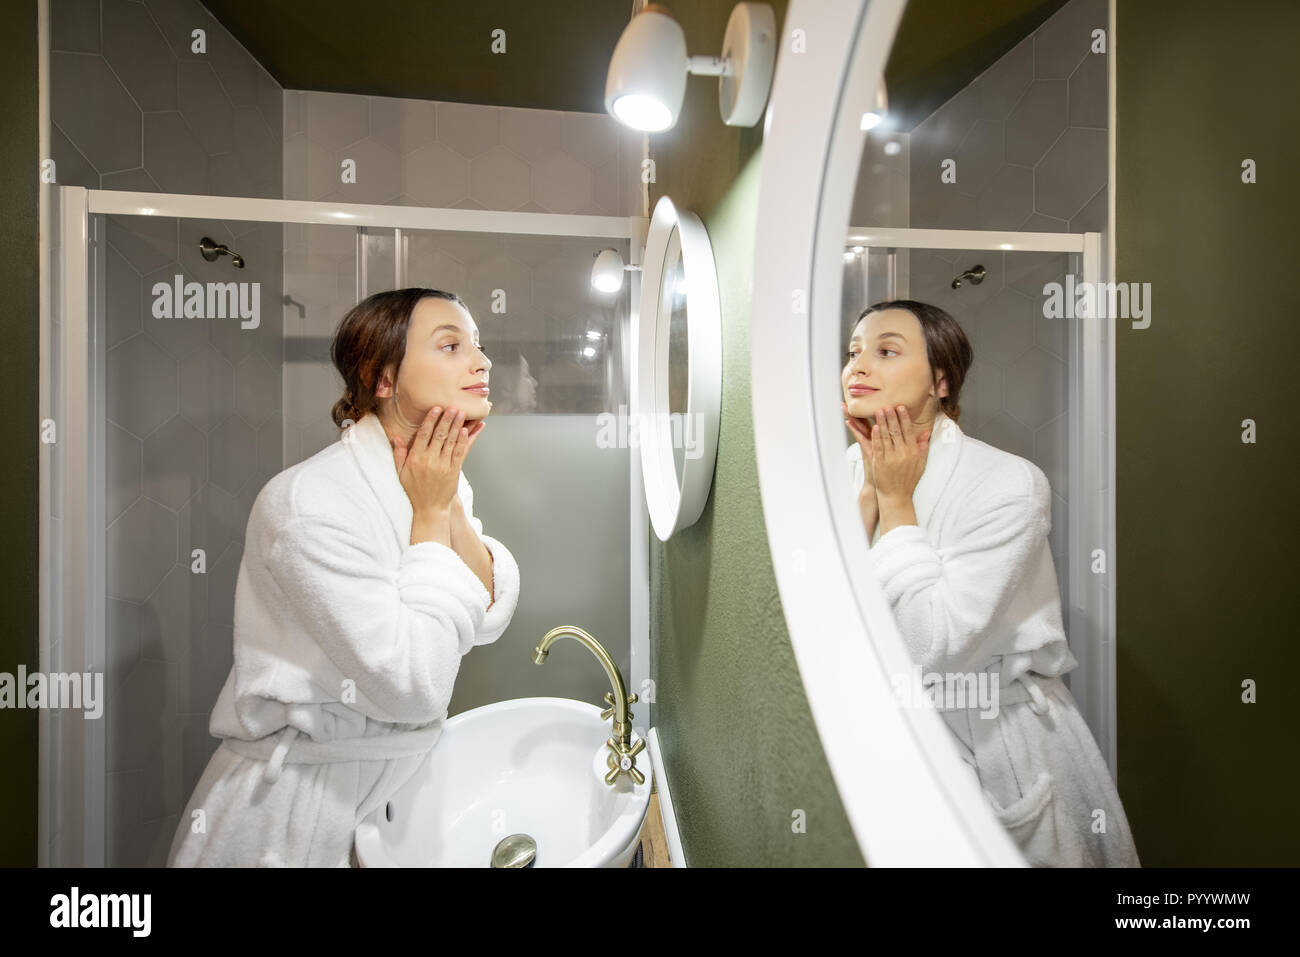 Woman In Bathrobe Making Facial Massage Looking Into The Round Mirror